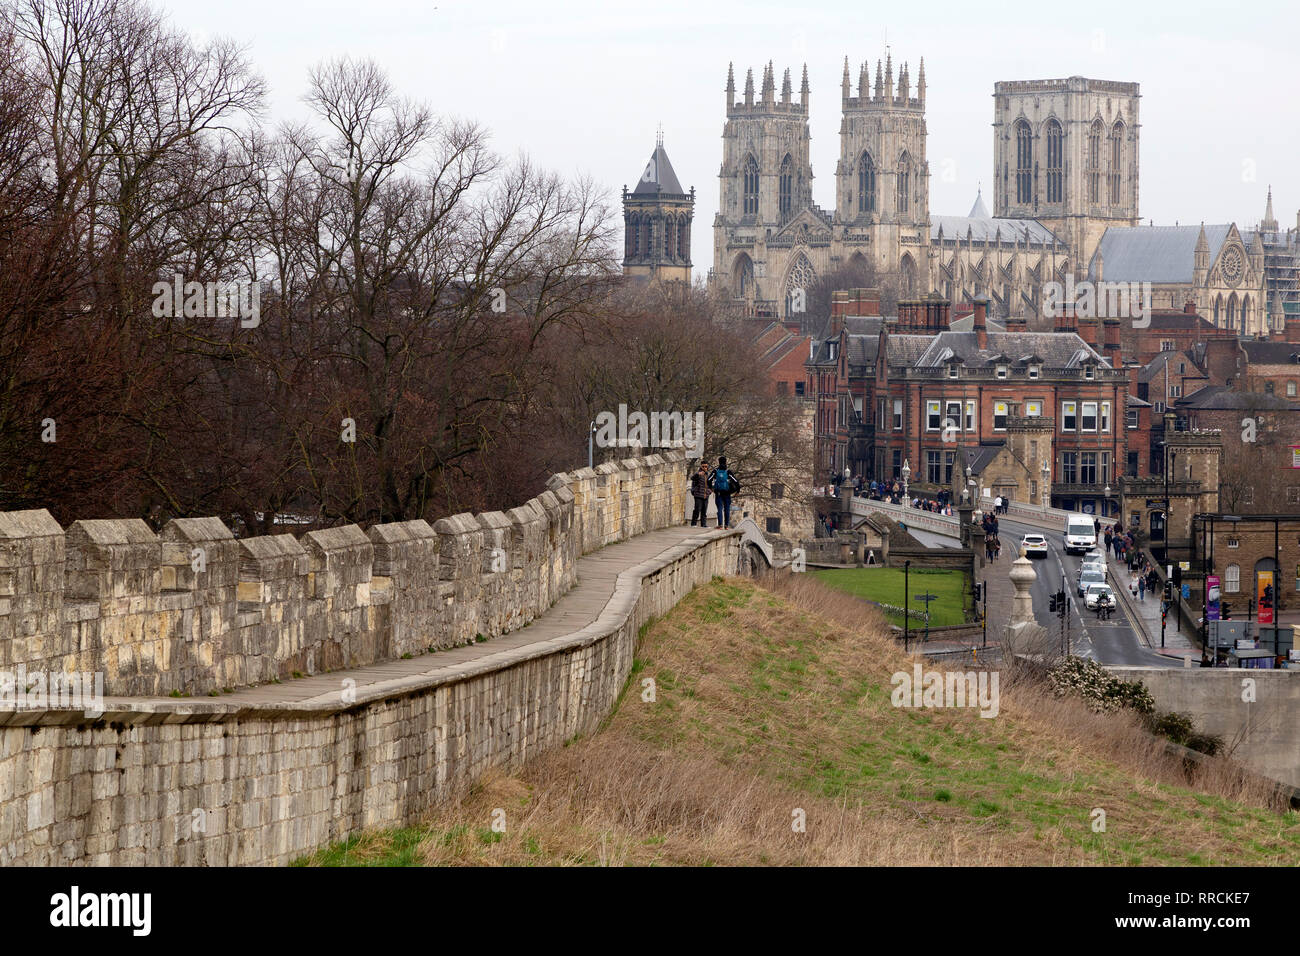 York Minster seen from the city walls in York, England. More than three miles of city walls can still be walked in the city. Stock Photo